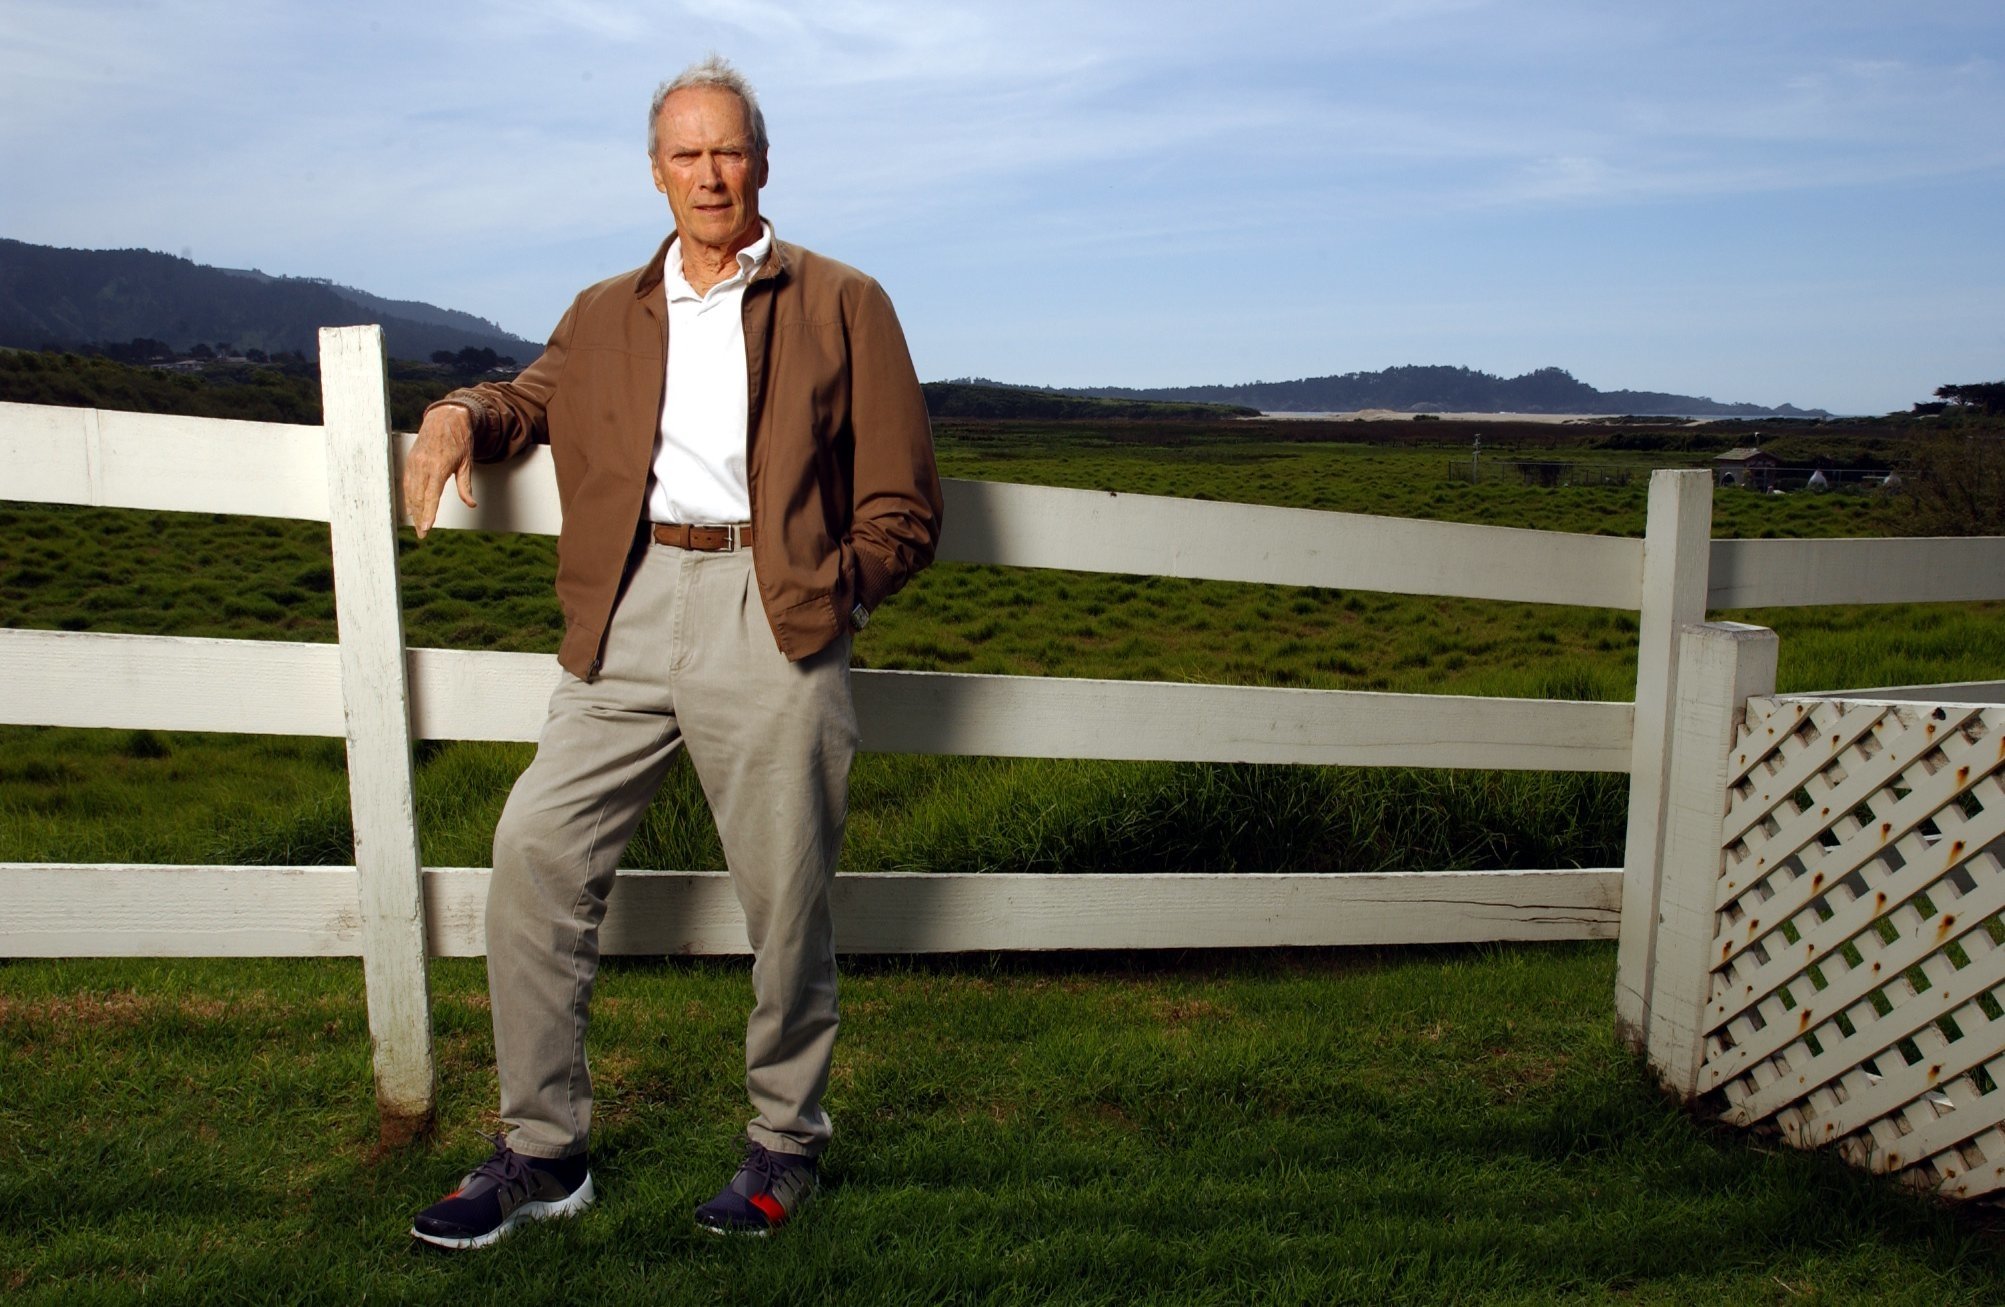 Actor Clint Eastwood at his Mission Ranch Inn in Carmel. | Source: Getty Images